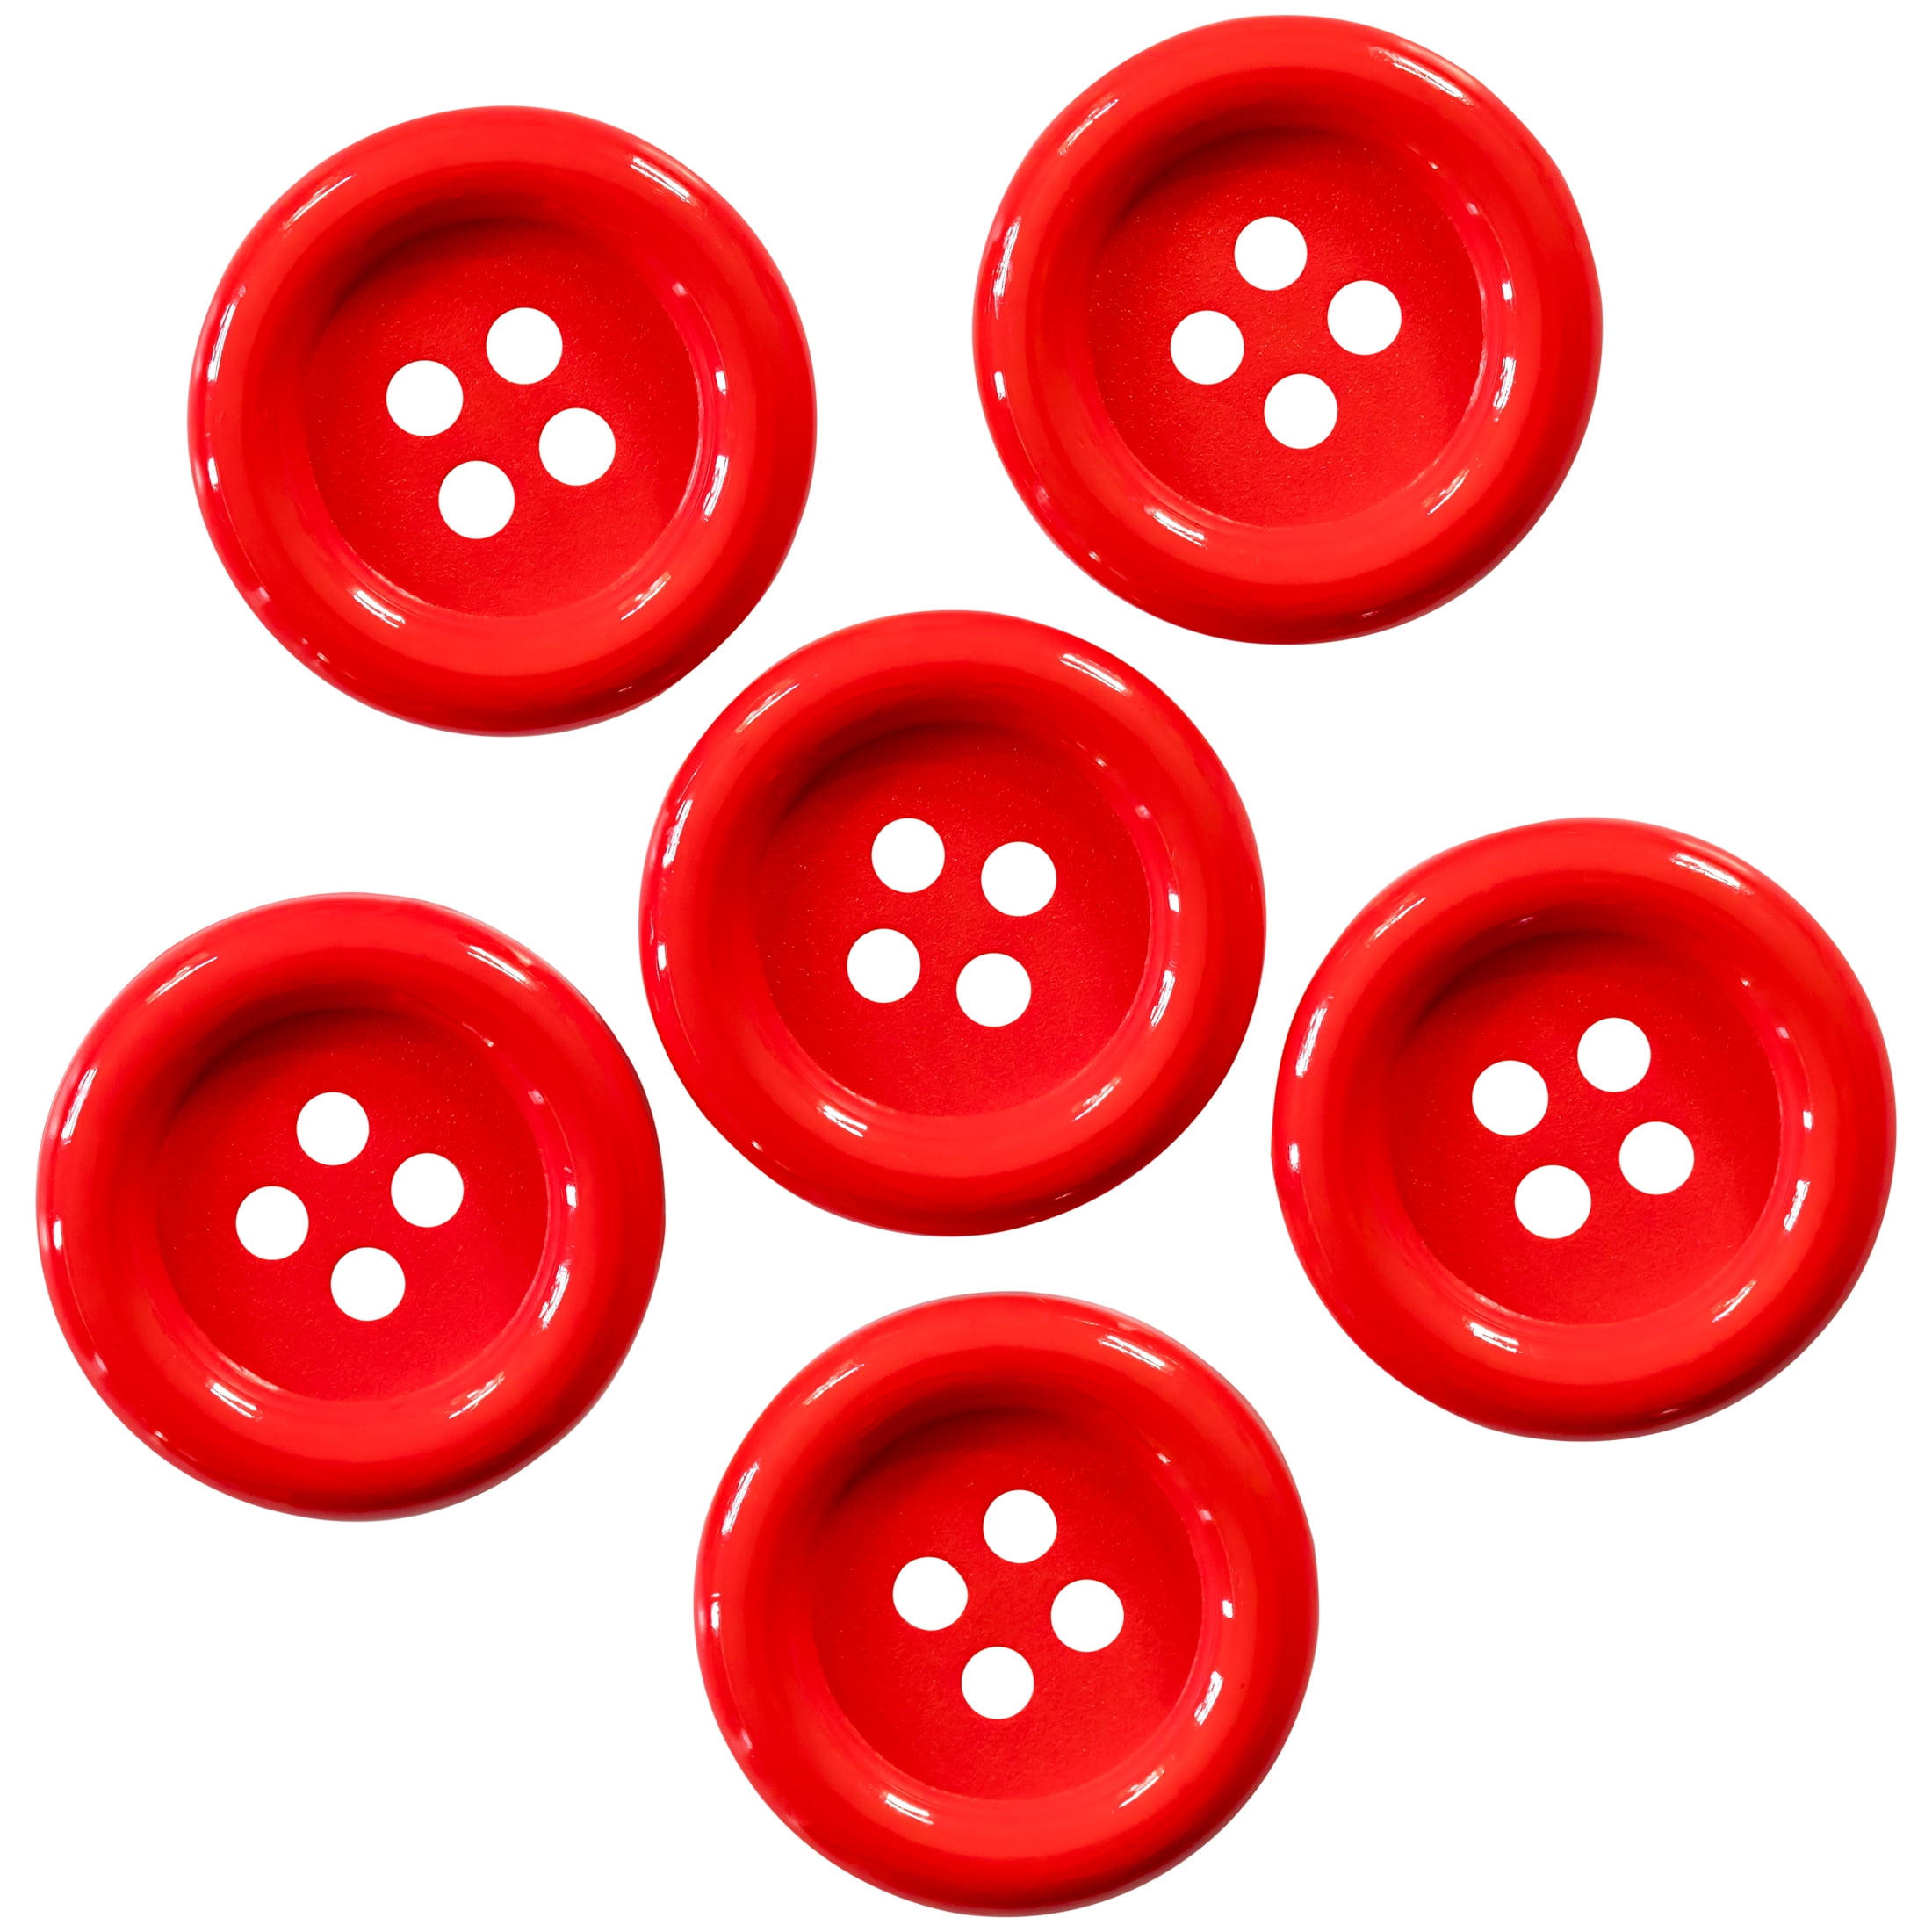 Very Tiny Red Heart Buttons - just 1/4 wide!